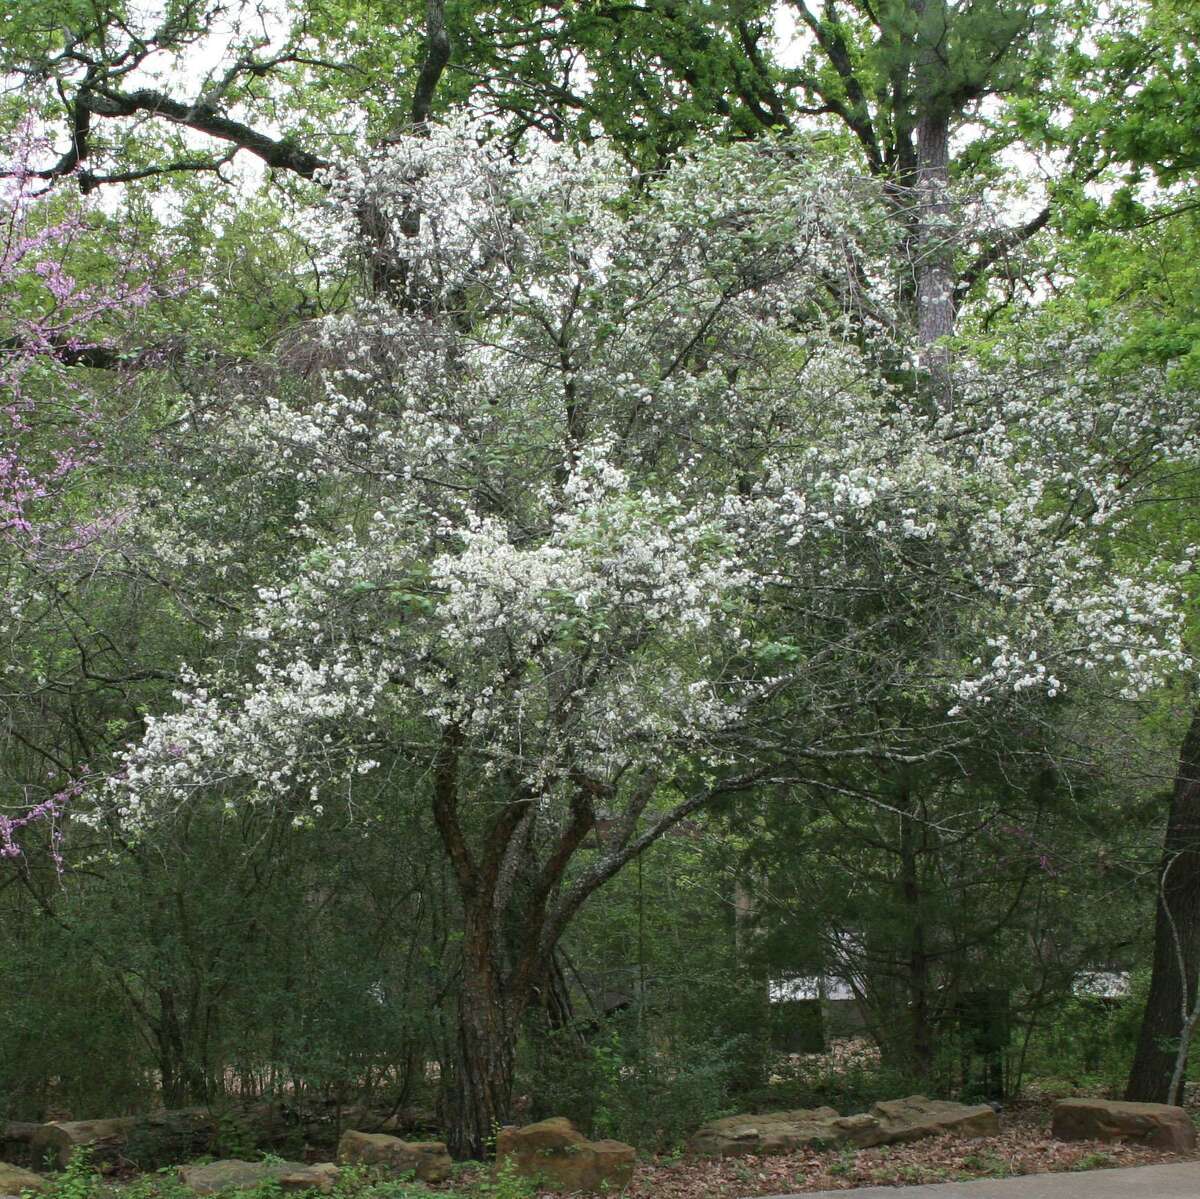 Mexican plum in bloom